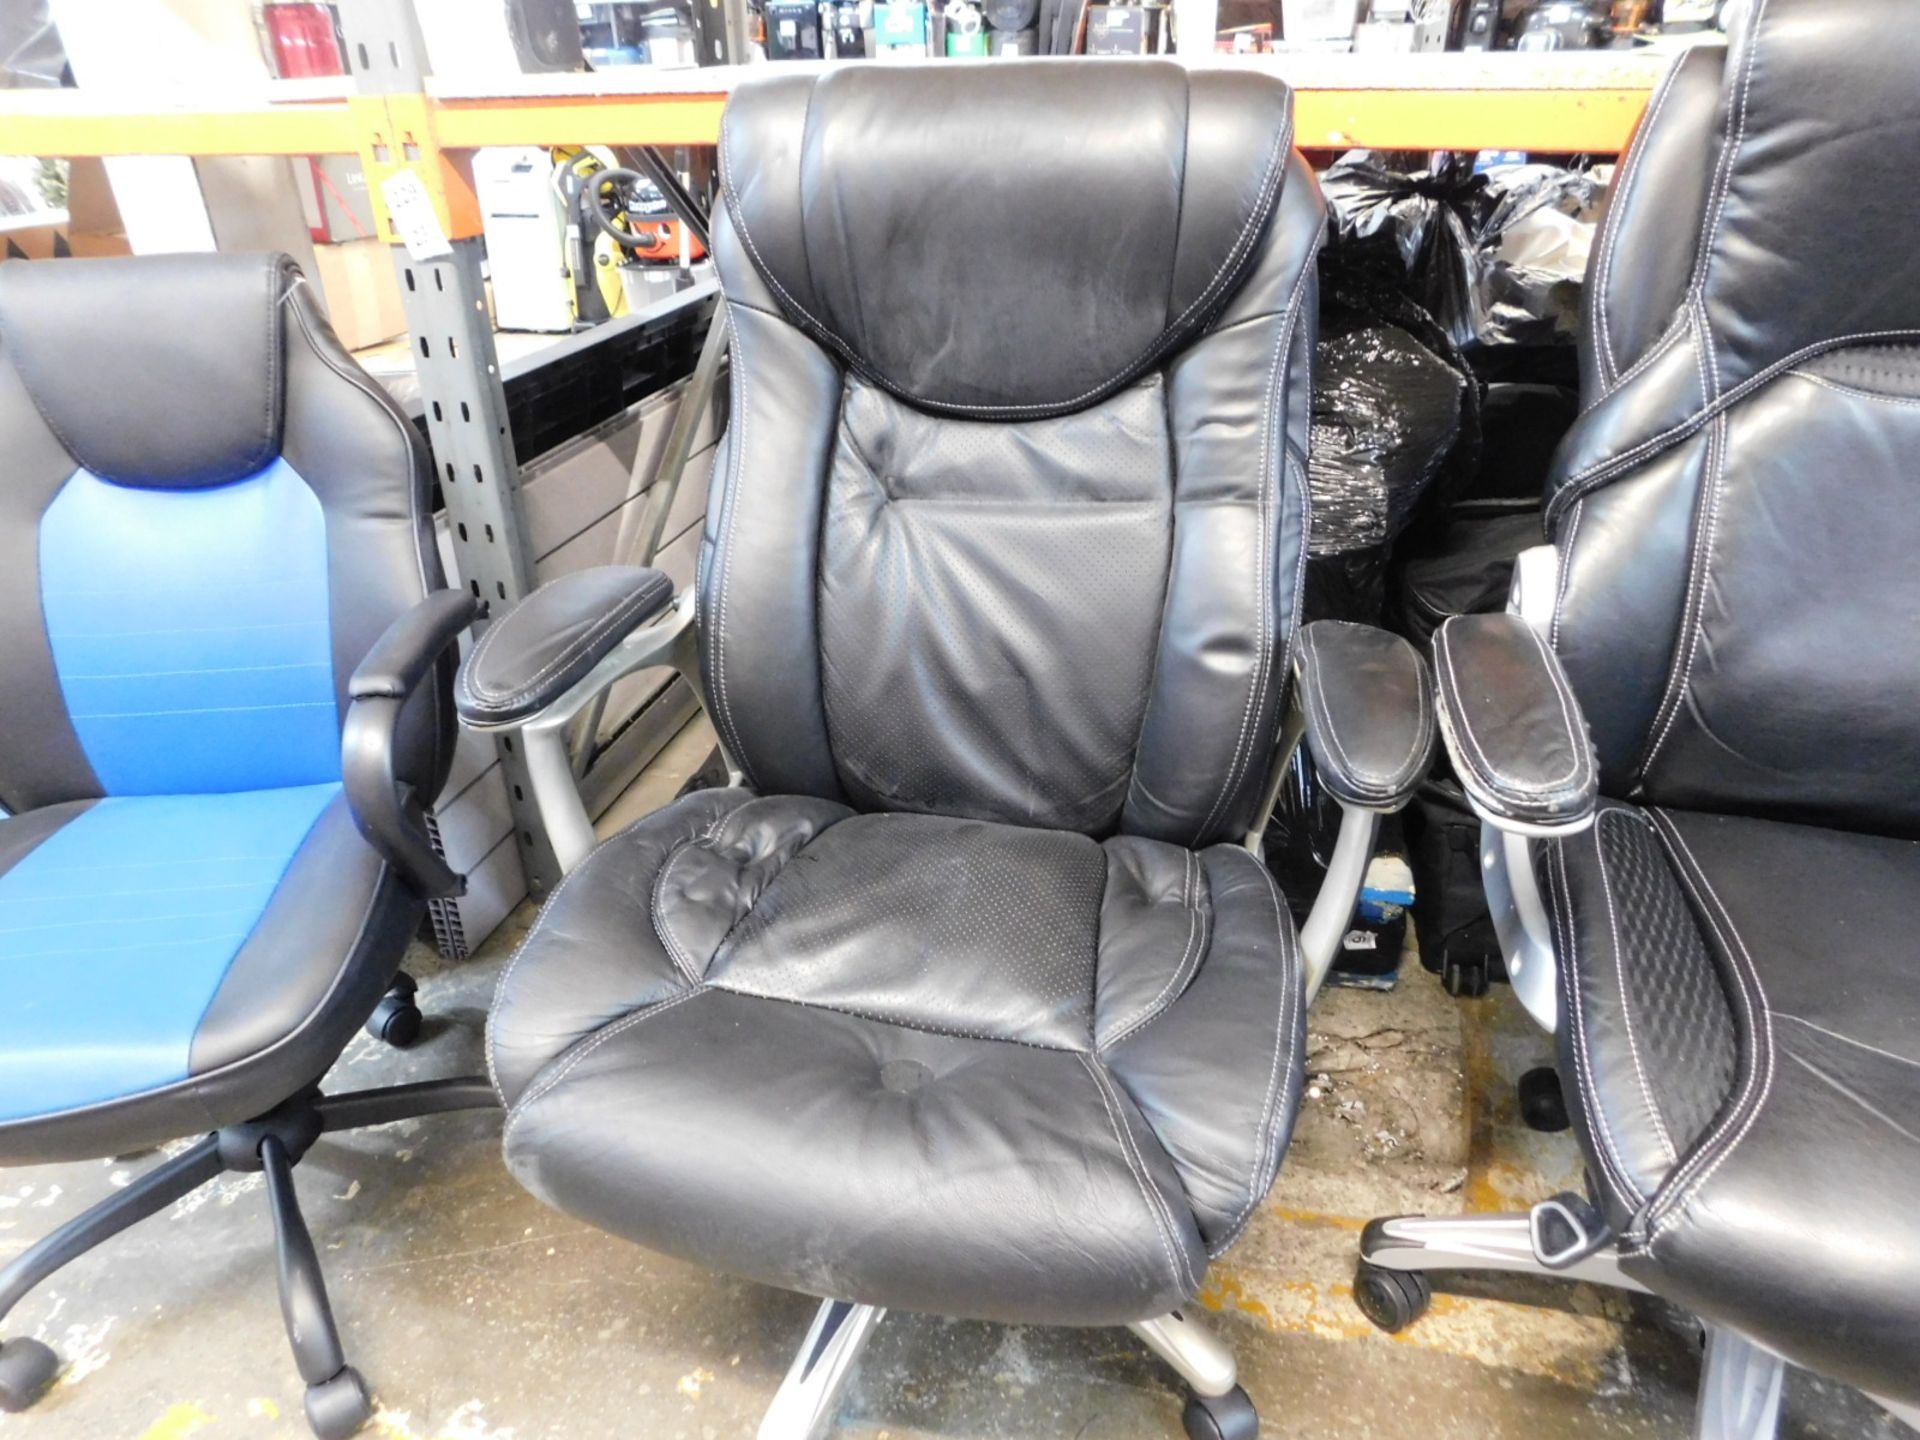 1 TRUE WELLNESS BLACK BONDED LEATHER GAS LIFT MANAGERS CHAIR RRP Â£179.99 (SPARES AND REPAIRS,